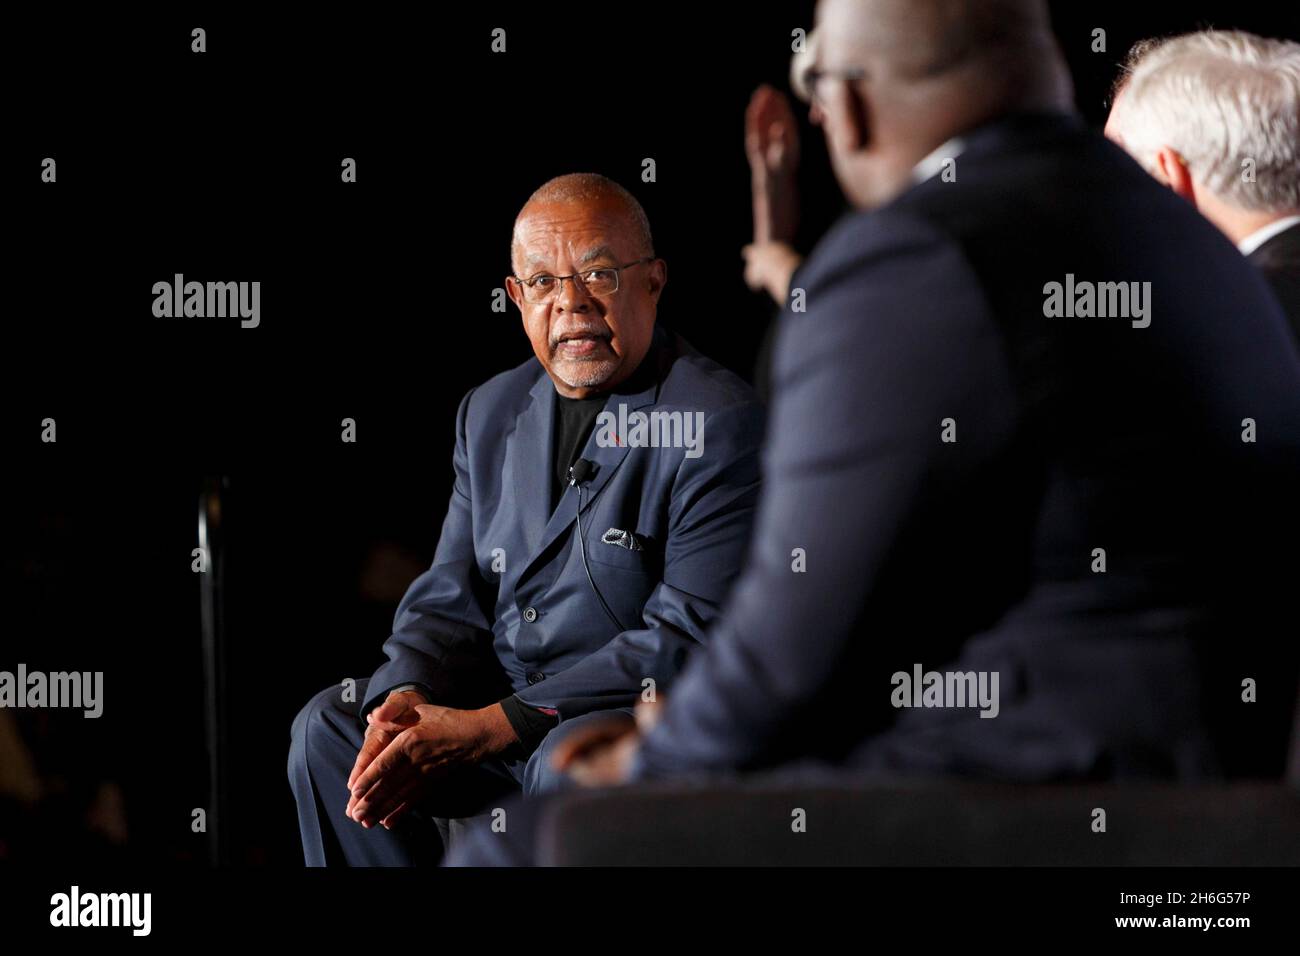 Washington, United States of America. 31 August, 2019. Author Henry Louis Gates Jr. speaks on a panel about race in America on the Understanding Our World Stage at the National Book Festival, August 31, 2019. Photo by Shawn Miller/Library of Congress. Credit: Shawn Miller/Library of Congress/Alamy Live News Stock Photo